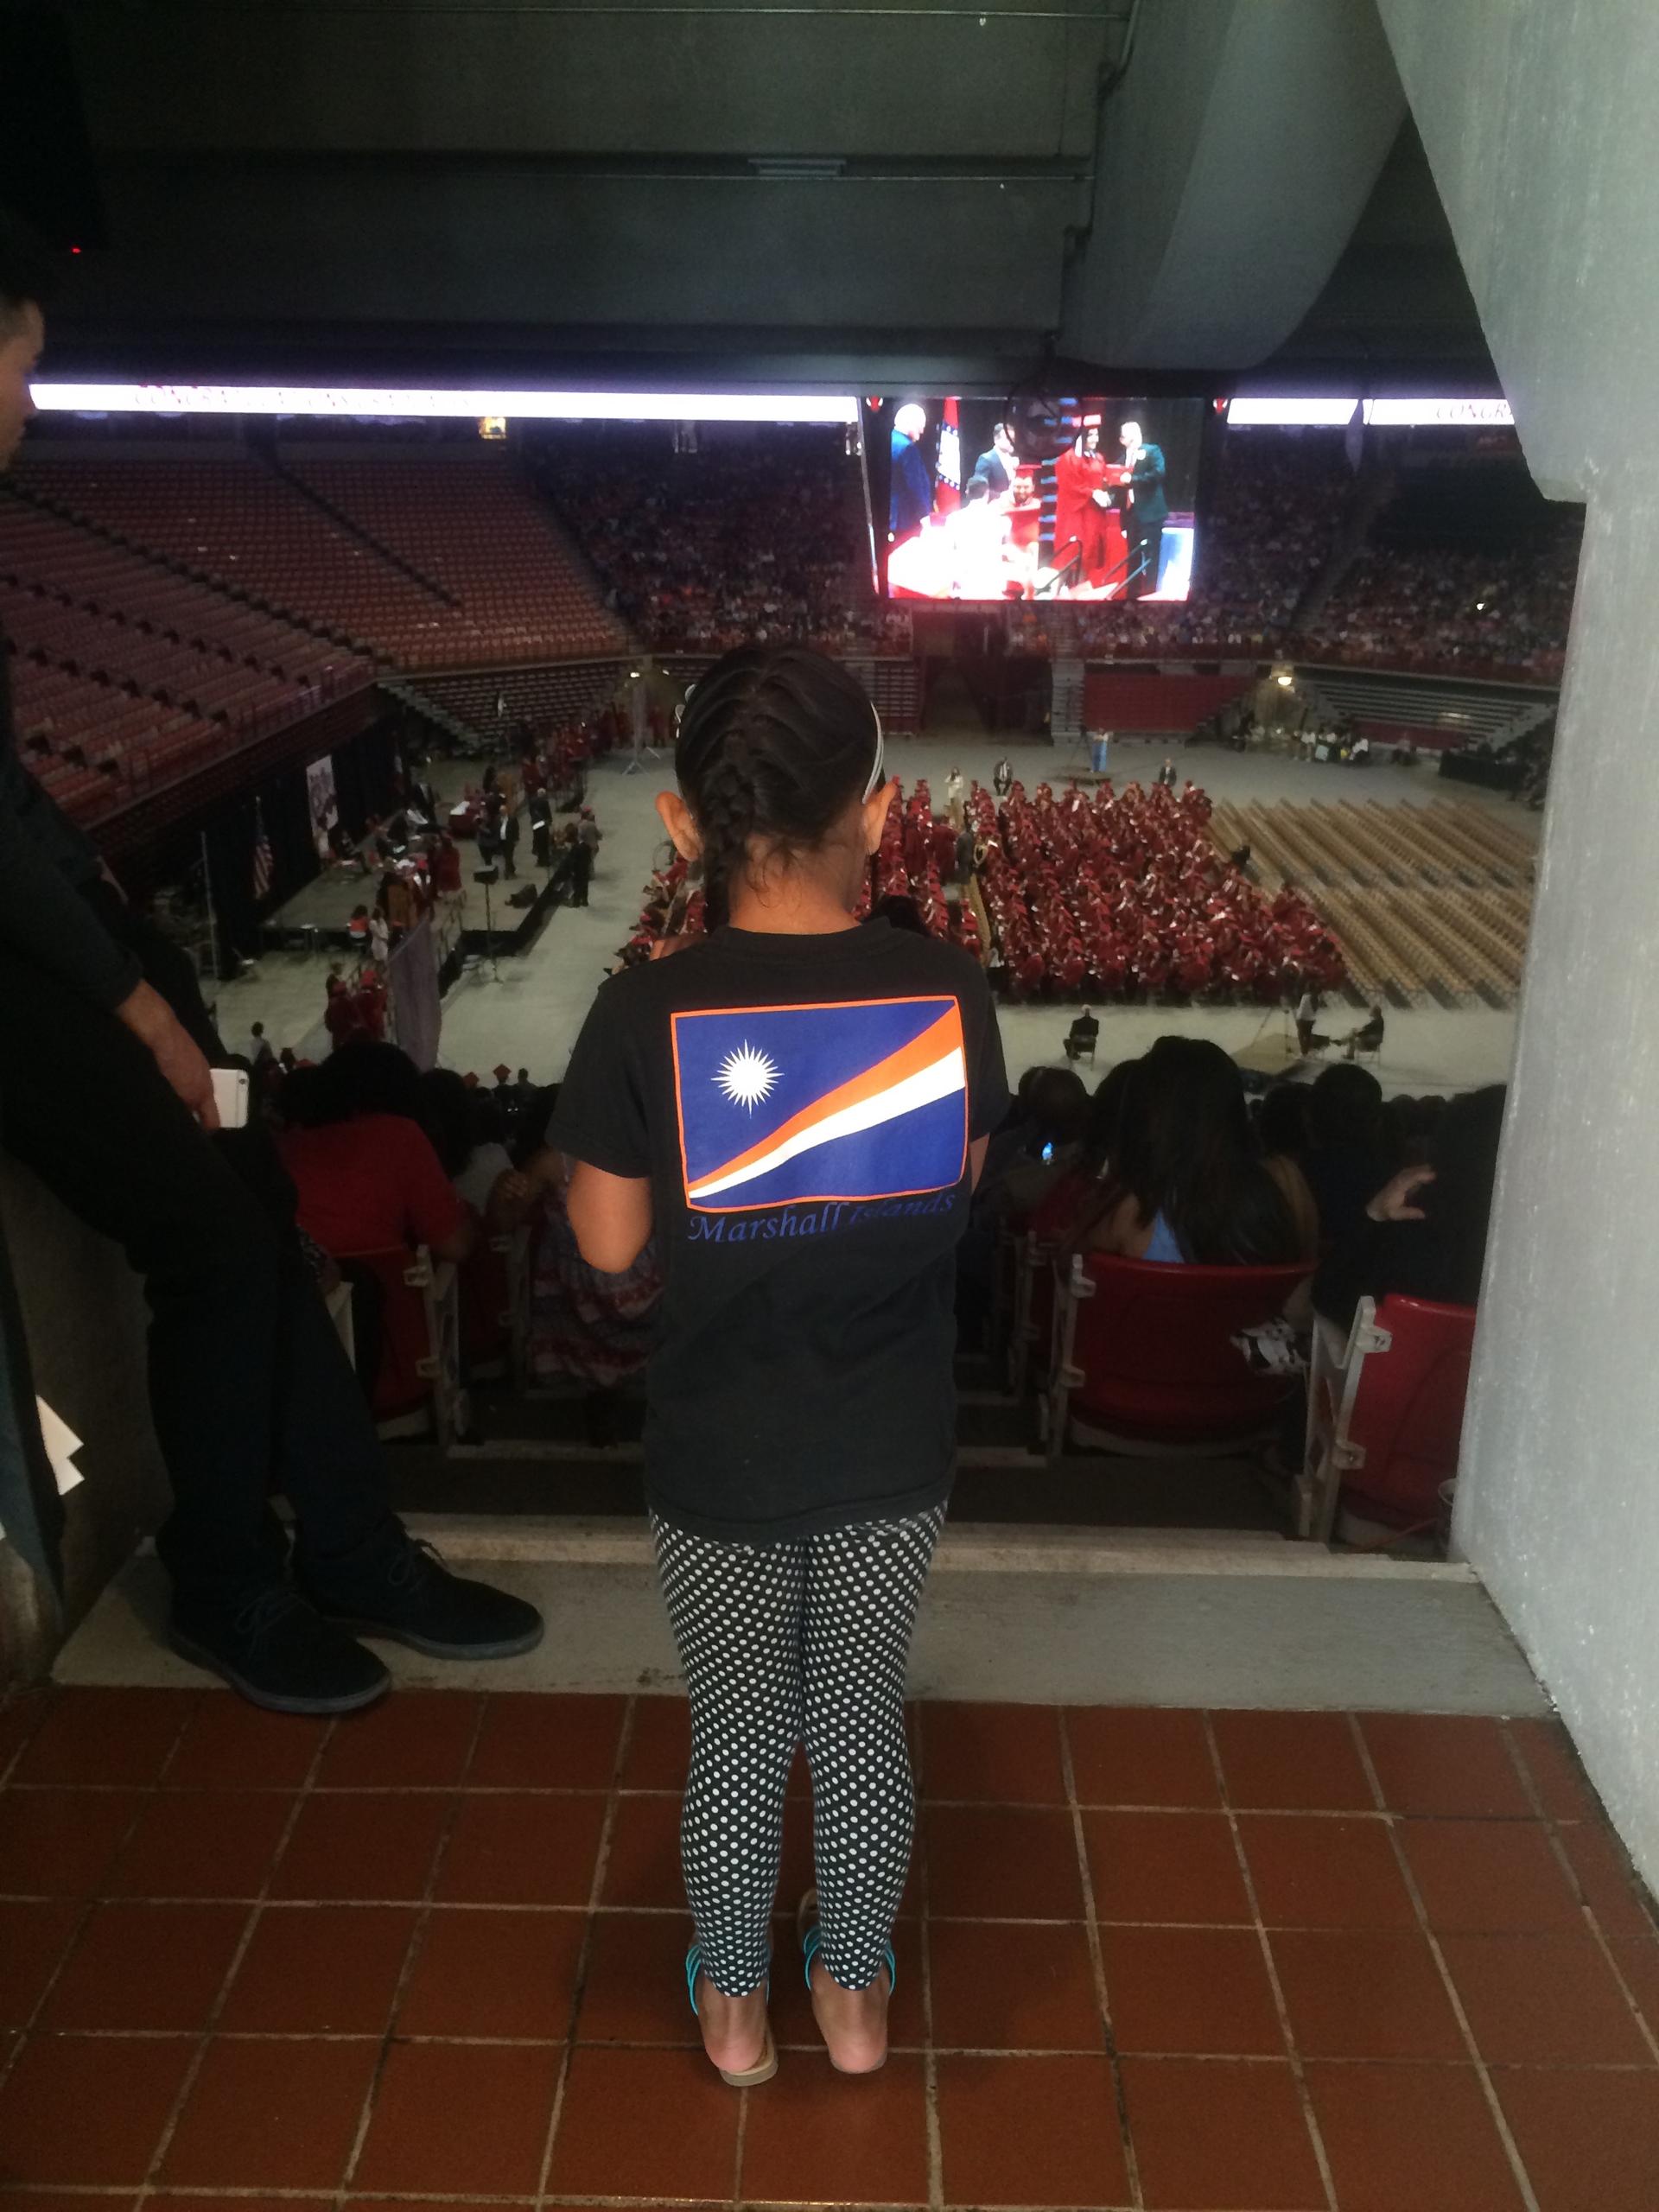 A young girl looks at graduation ceremony from above, in arena